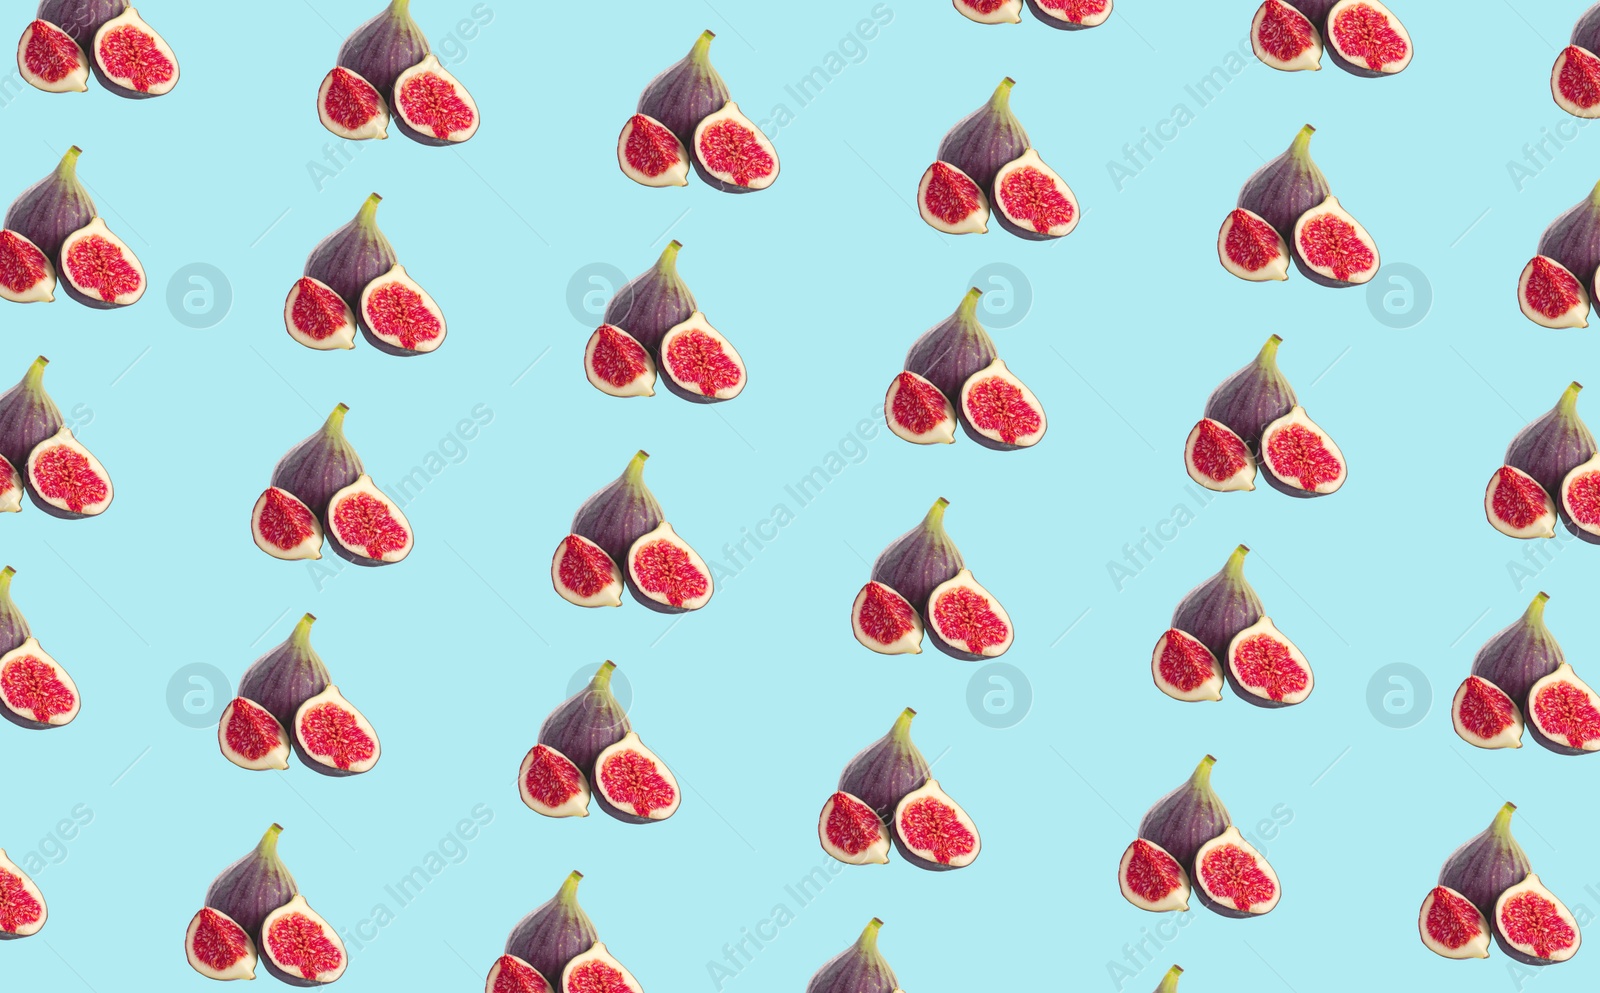 Image of Pattern of cut and whole figs on pale light blue background